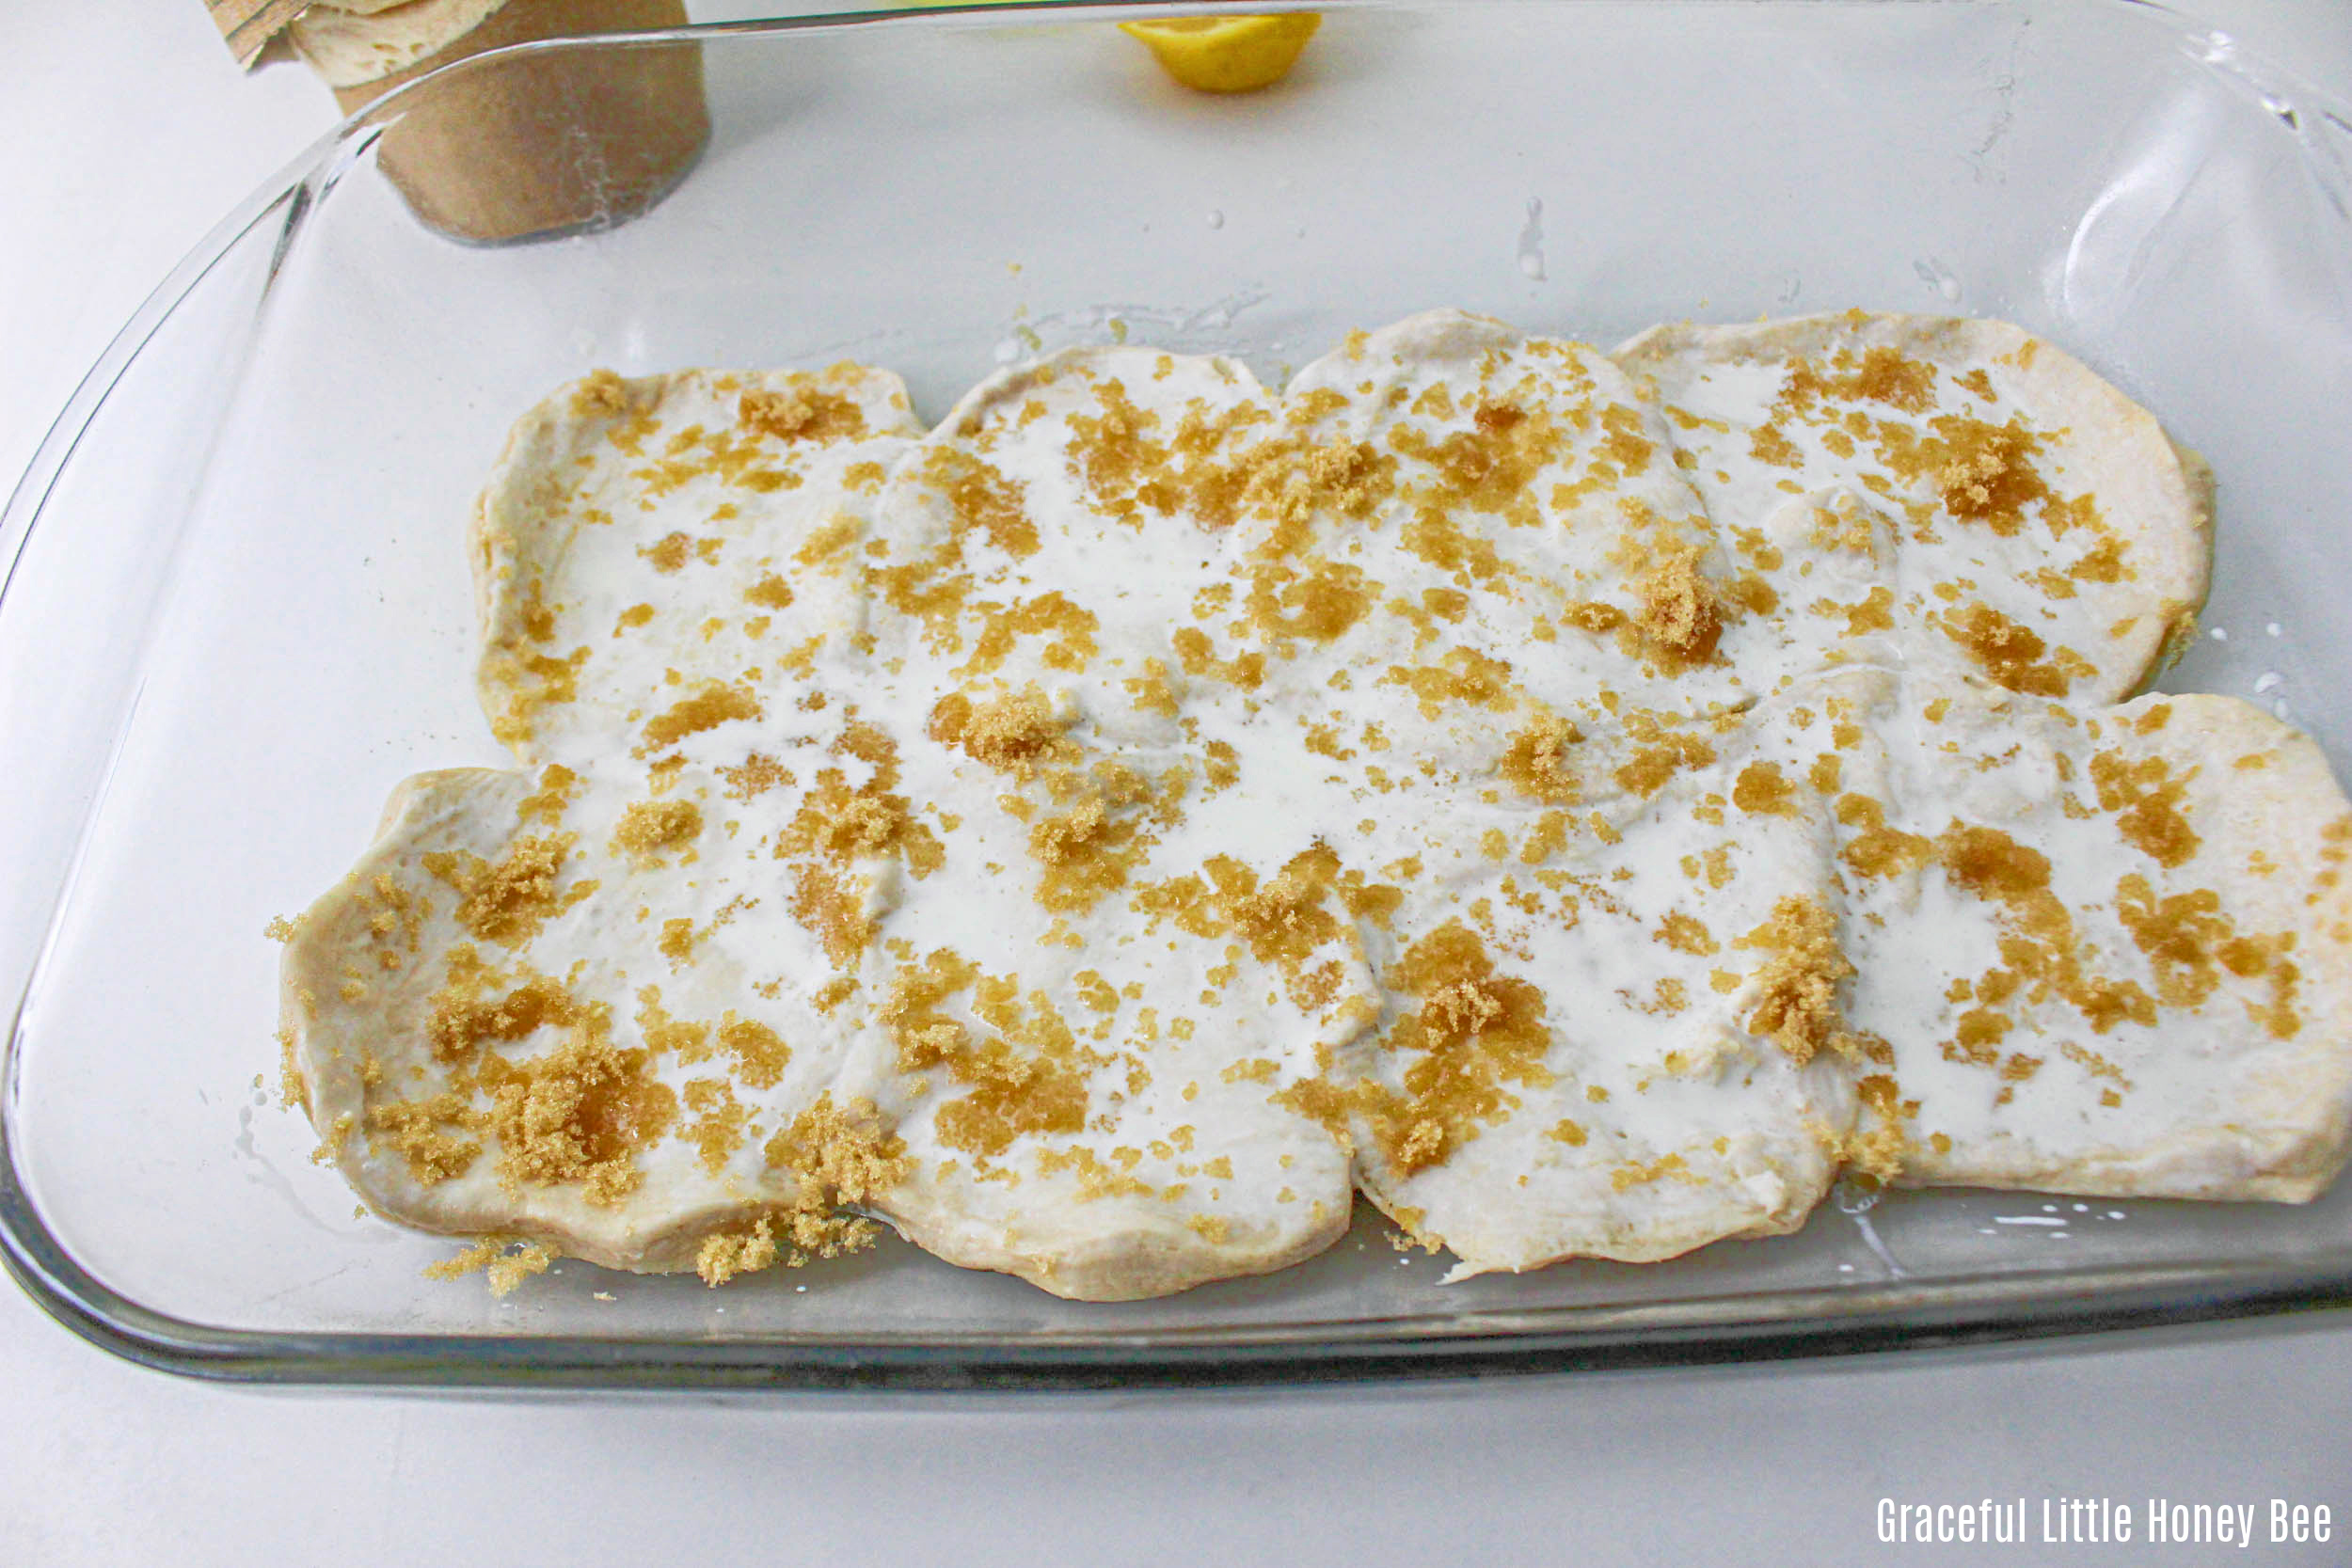 Raw biscuits in baking dish with cream and brown sugar on top.